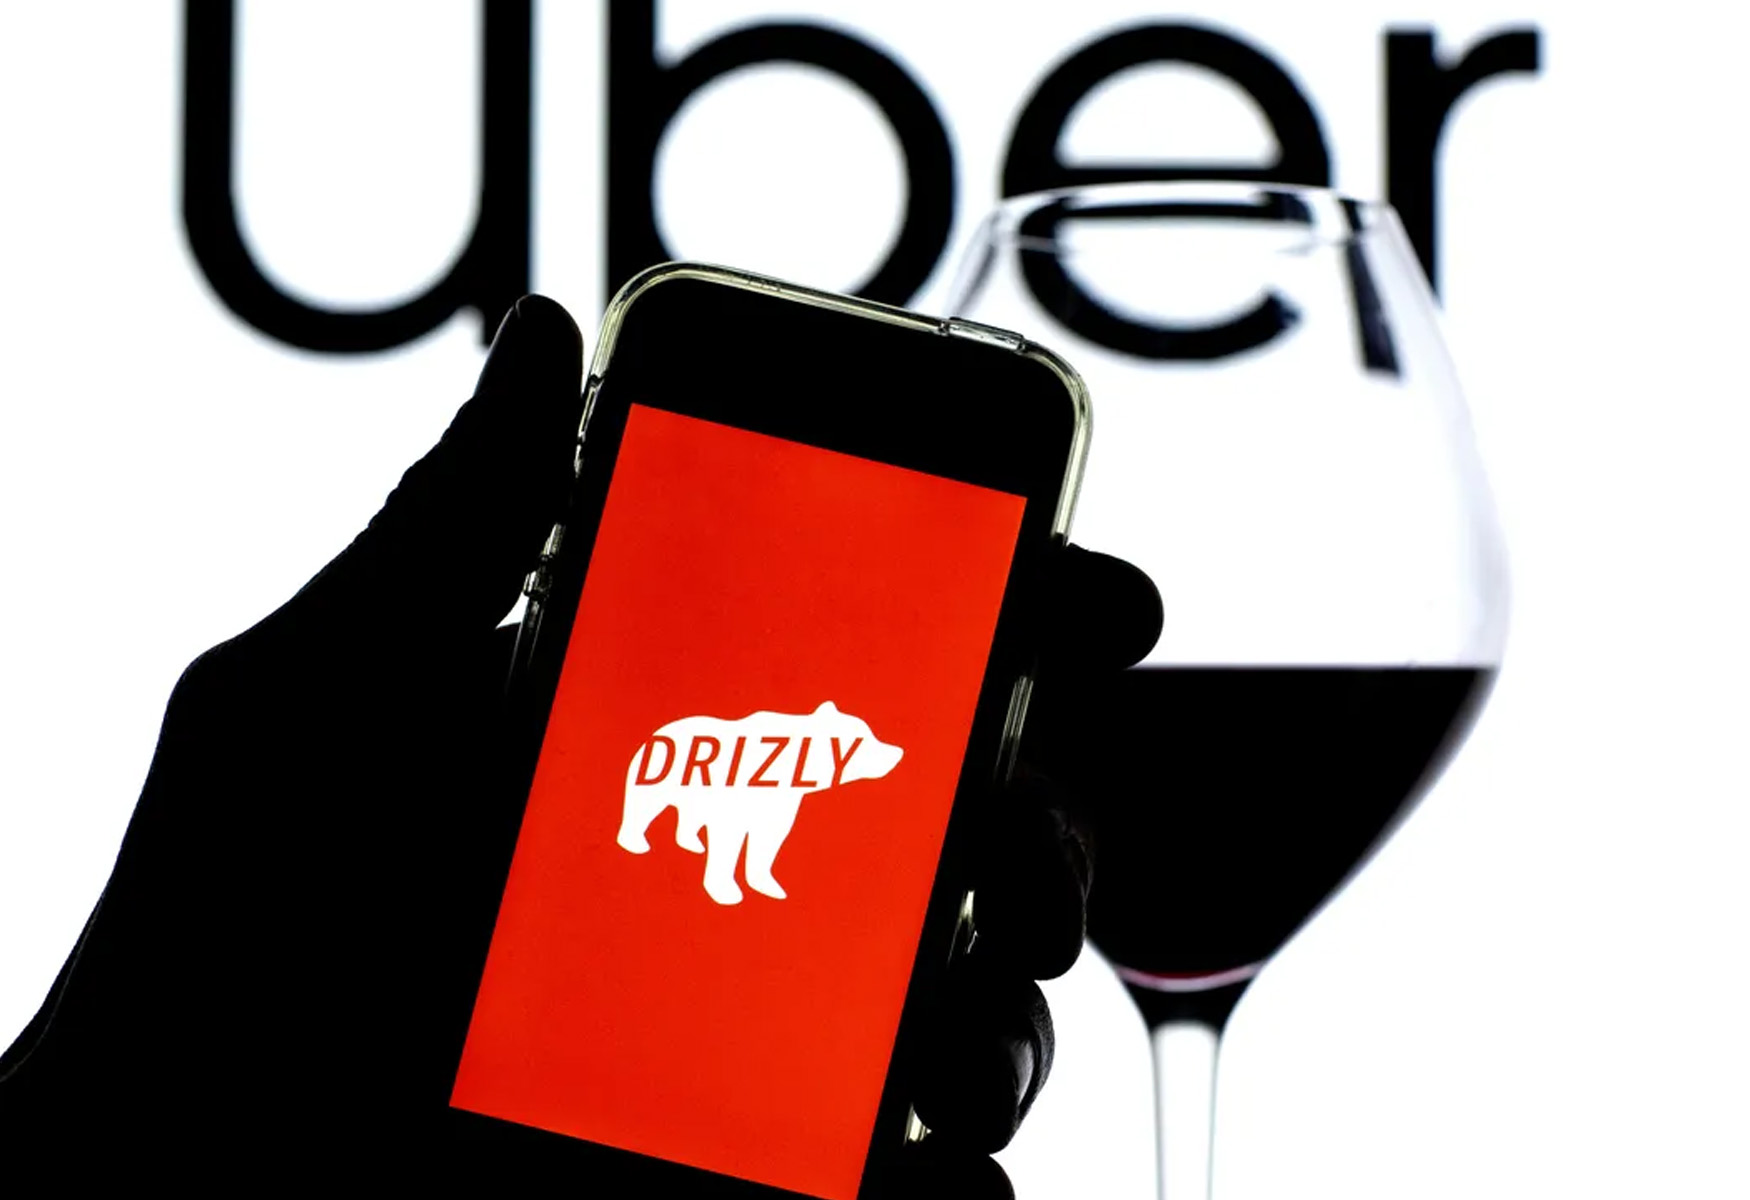 Uber To Shut Down Drizly Alcohol Delivery Service After Three Years